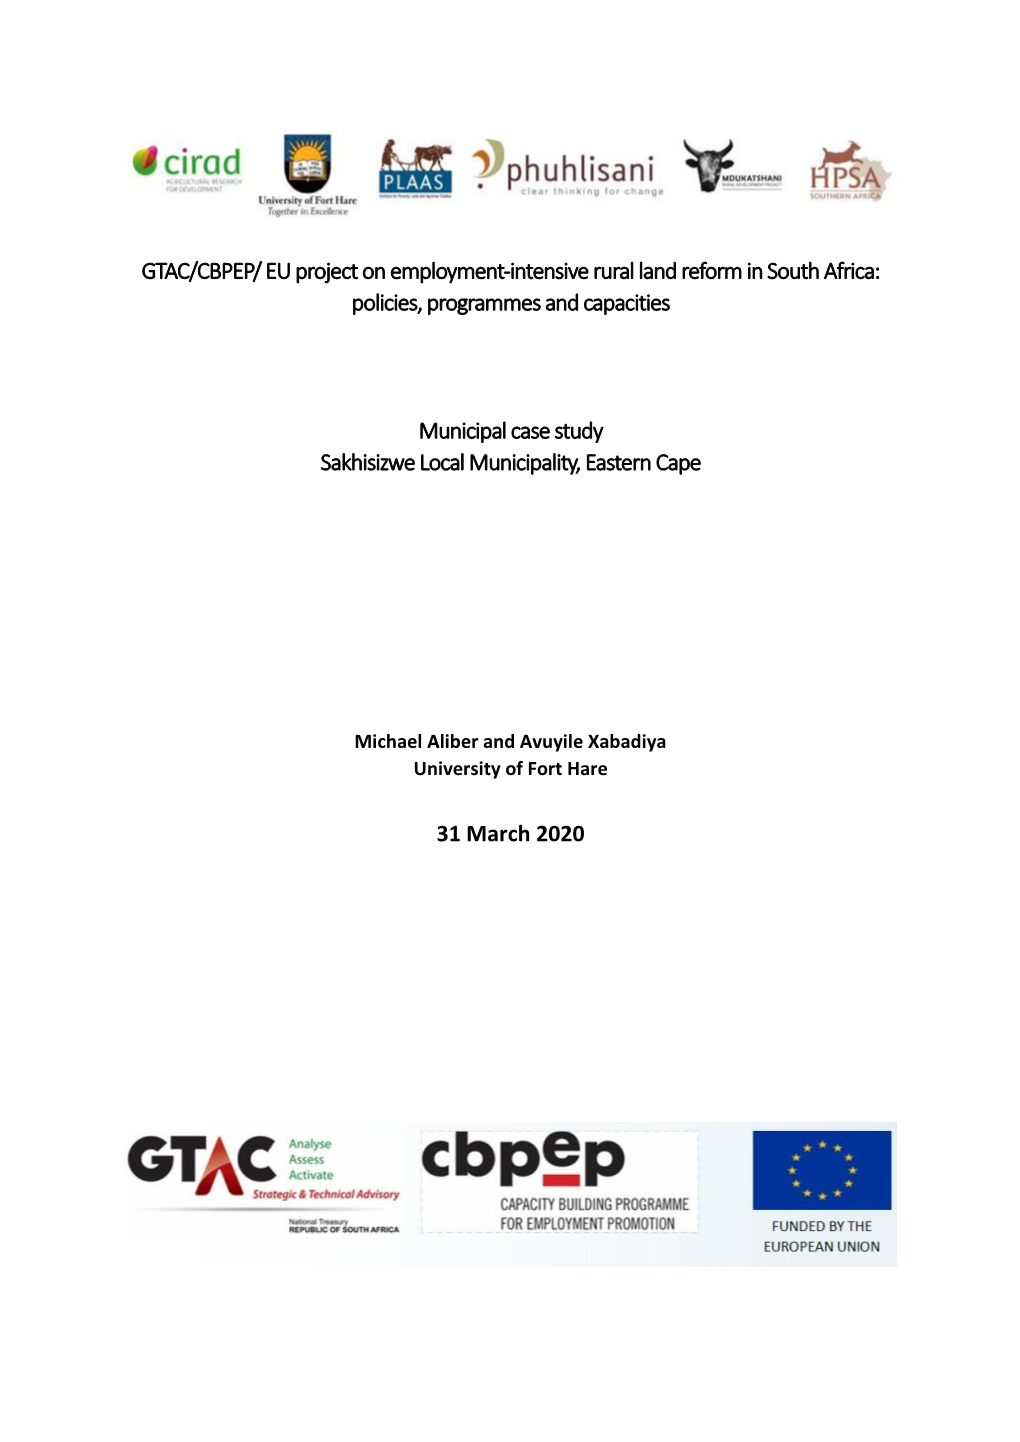 EU Project on Employment-Intensive Rural Land Reform in South Africa: Policies, Programmes and Capacities